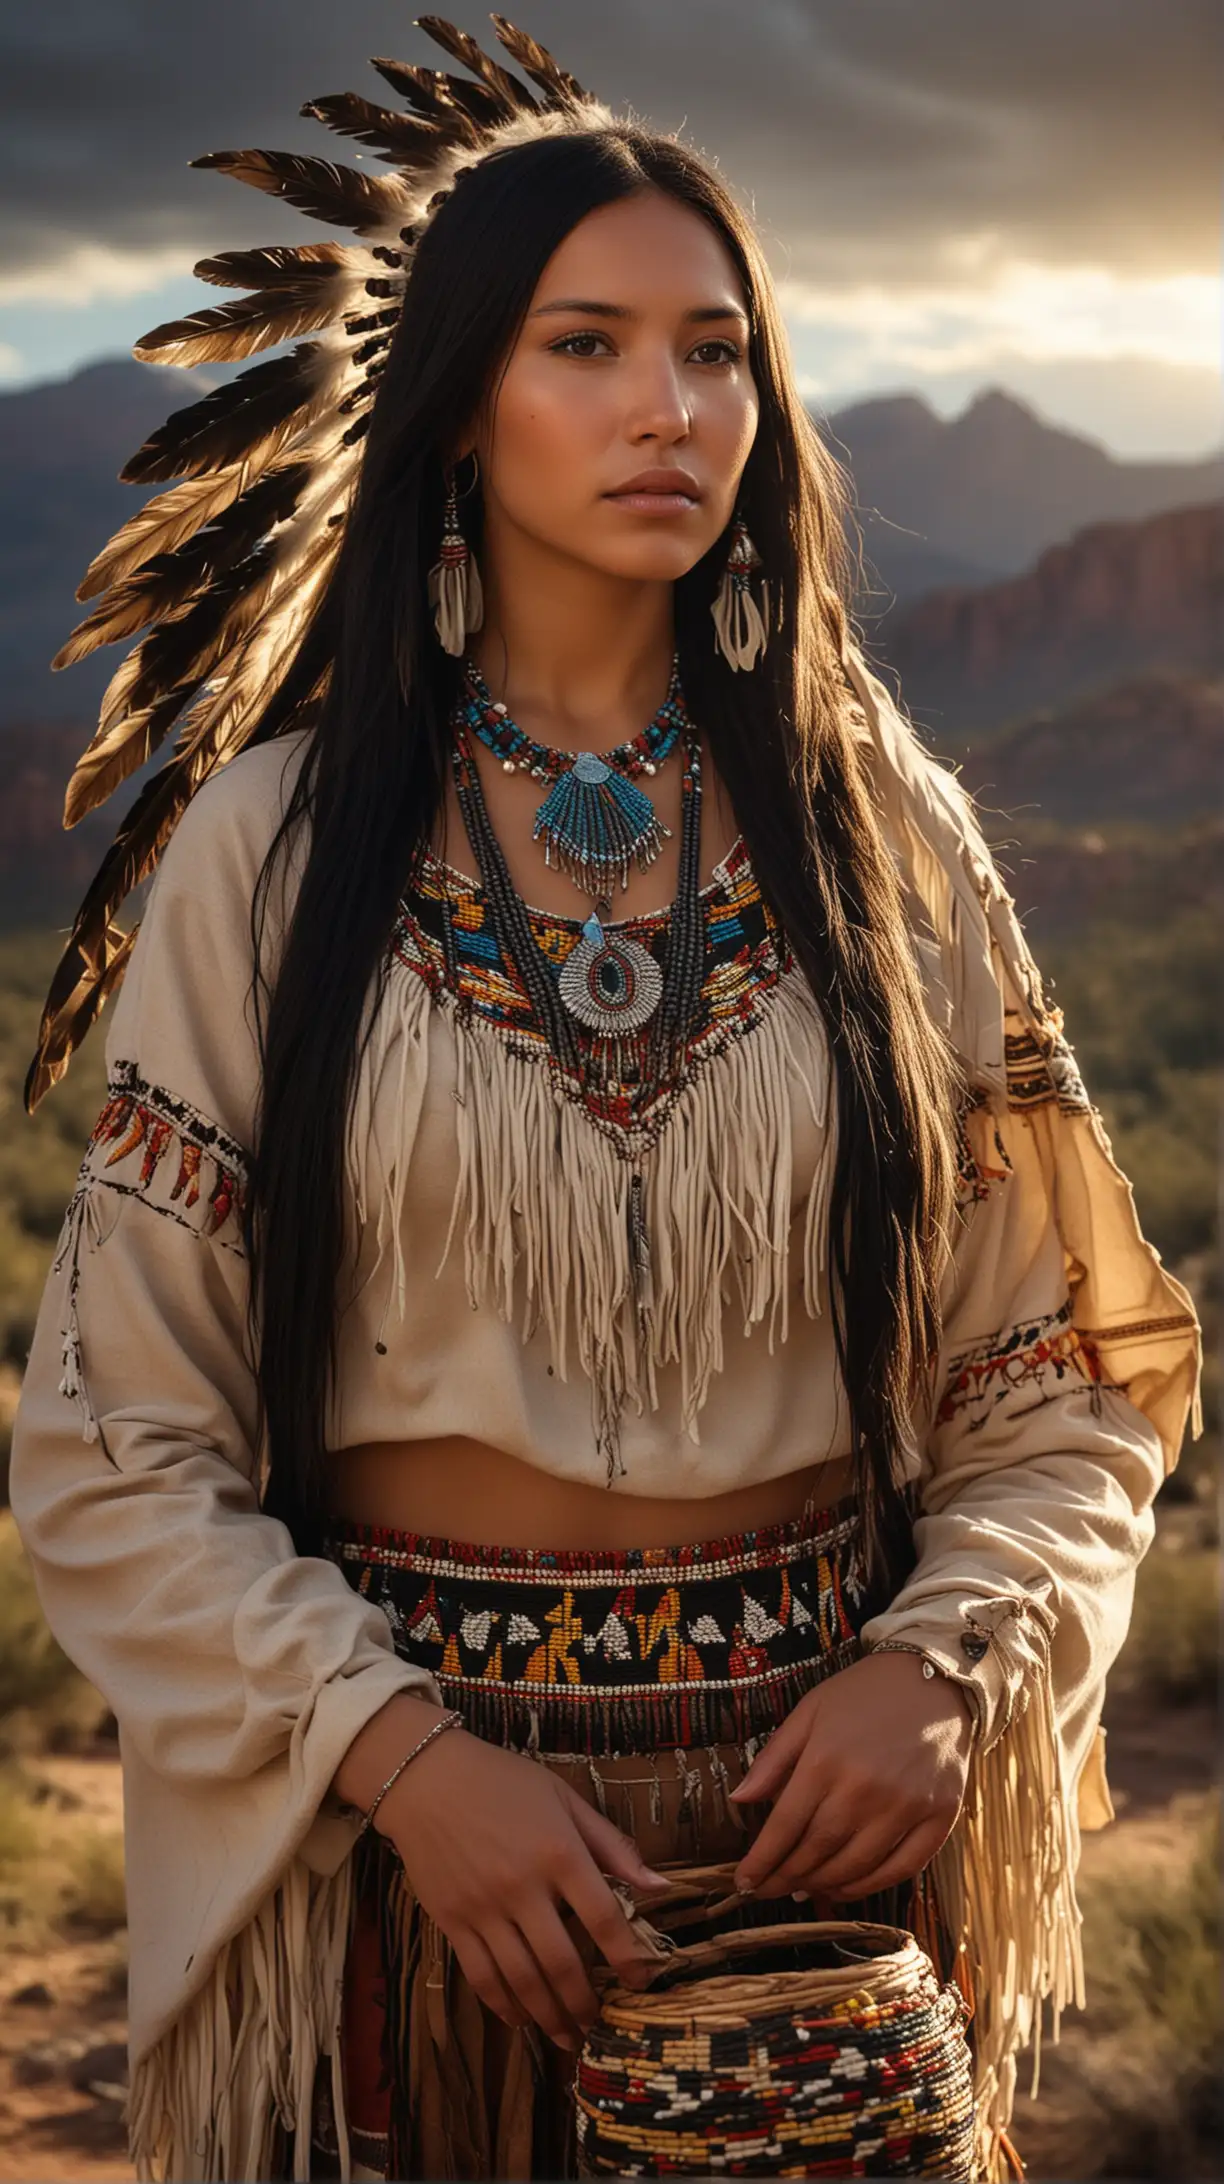 Create an image of a stunning Apache girl embodying grace, strength, and beauty. She should have long, flowing black hair adorned with feathers and beads, reflecting traditional Apache culture. Her facial features should exude confidence and resilience, with piercing eyes that captivate the viewer.
Dressed in traditional Apache attire, she should wear a beautifully crafted buckskin dress adorned with intricate beadwork and fringe, symbolizing the craftsmanship and artistry of her people. Accessories such as silver jewelry, including bracelets, necklaces, and earrings, should accentuate her attire, adding to her allure and elegance.
The background of the image should depict the breathtaking landscape of the American Southwest, with rolling desert plains, majestic mountains, and vibrant colors that complement the richness of Apache culture. Sunlight streaming through the clouds should illuminate her figure, creating a sense of warmth and radiance.

In her hands, she could hold traditional Apache artifacts or symbols, such as a woven basket, a pottery vessel, or a ceremonial item, adding depth and authenticity to the portrayal.
Overall, the image should celebrate the beauty and resilience of Apache culture, while also capturing the timeless allure of the Southwest landscape.Hyper realistic